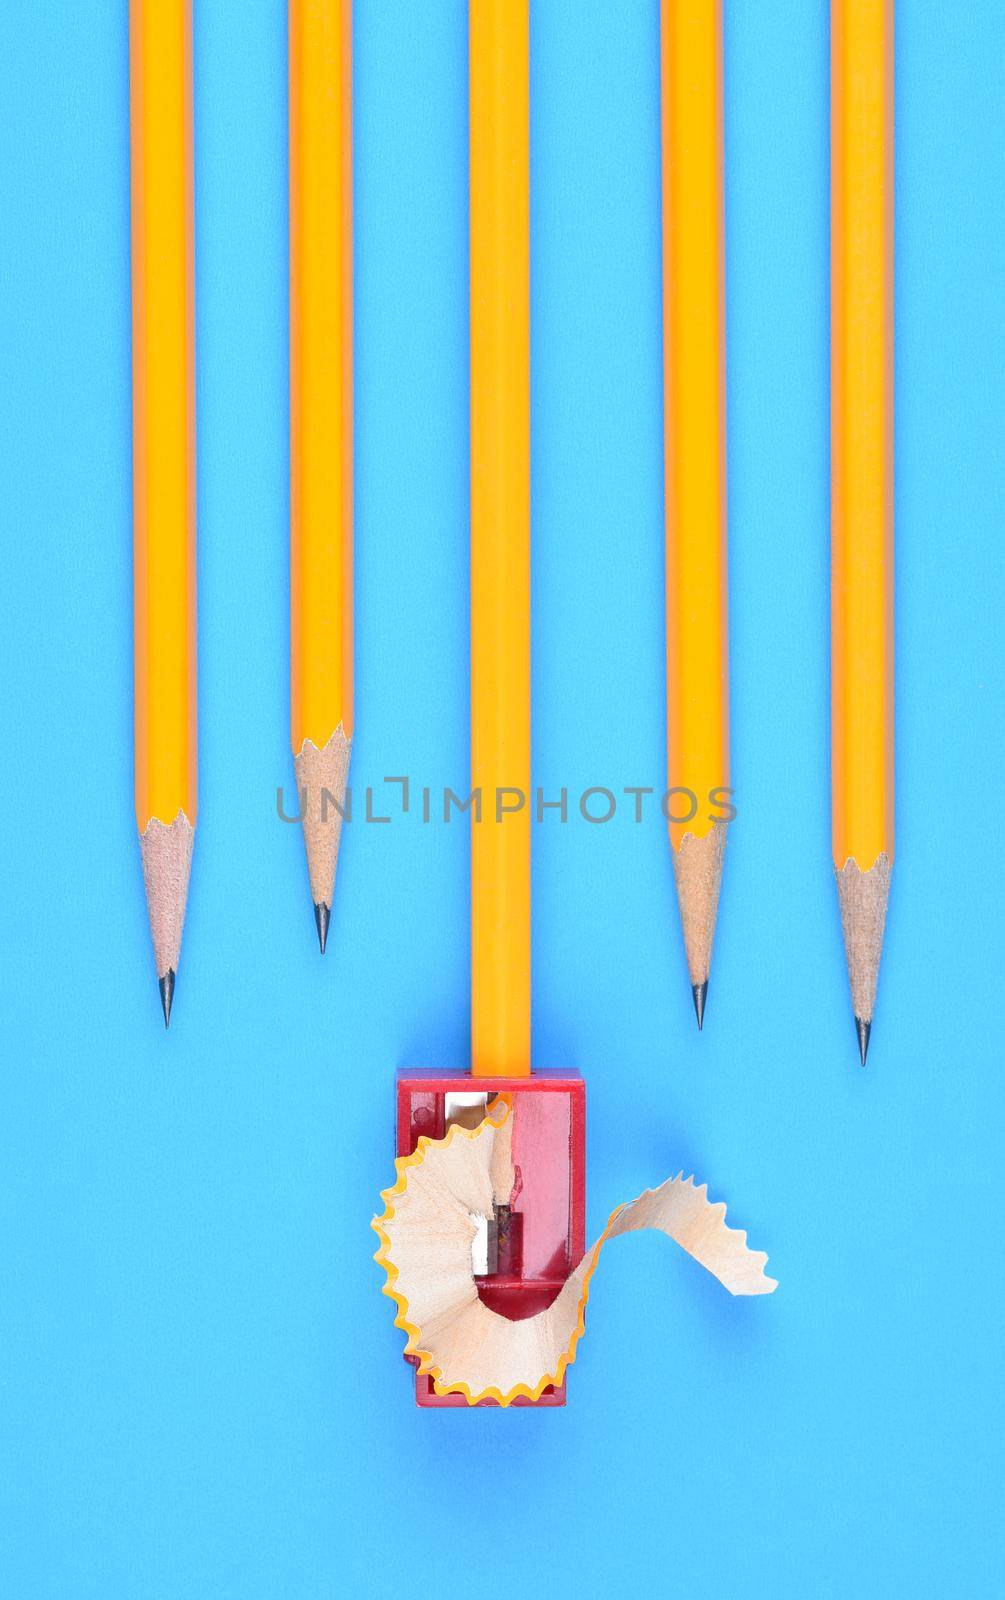 Back to School Concept: Yellow Pencils with a sharpener and shavings, on a blue background.